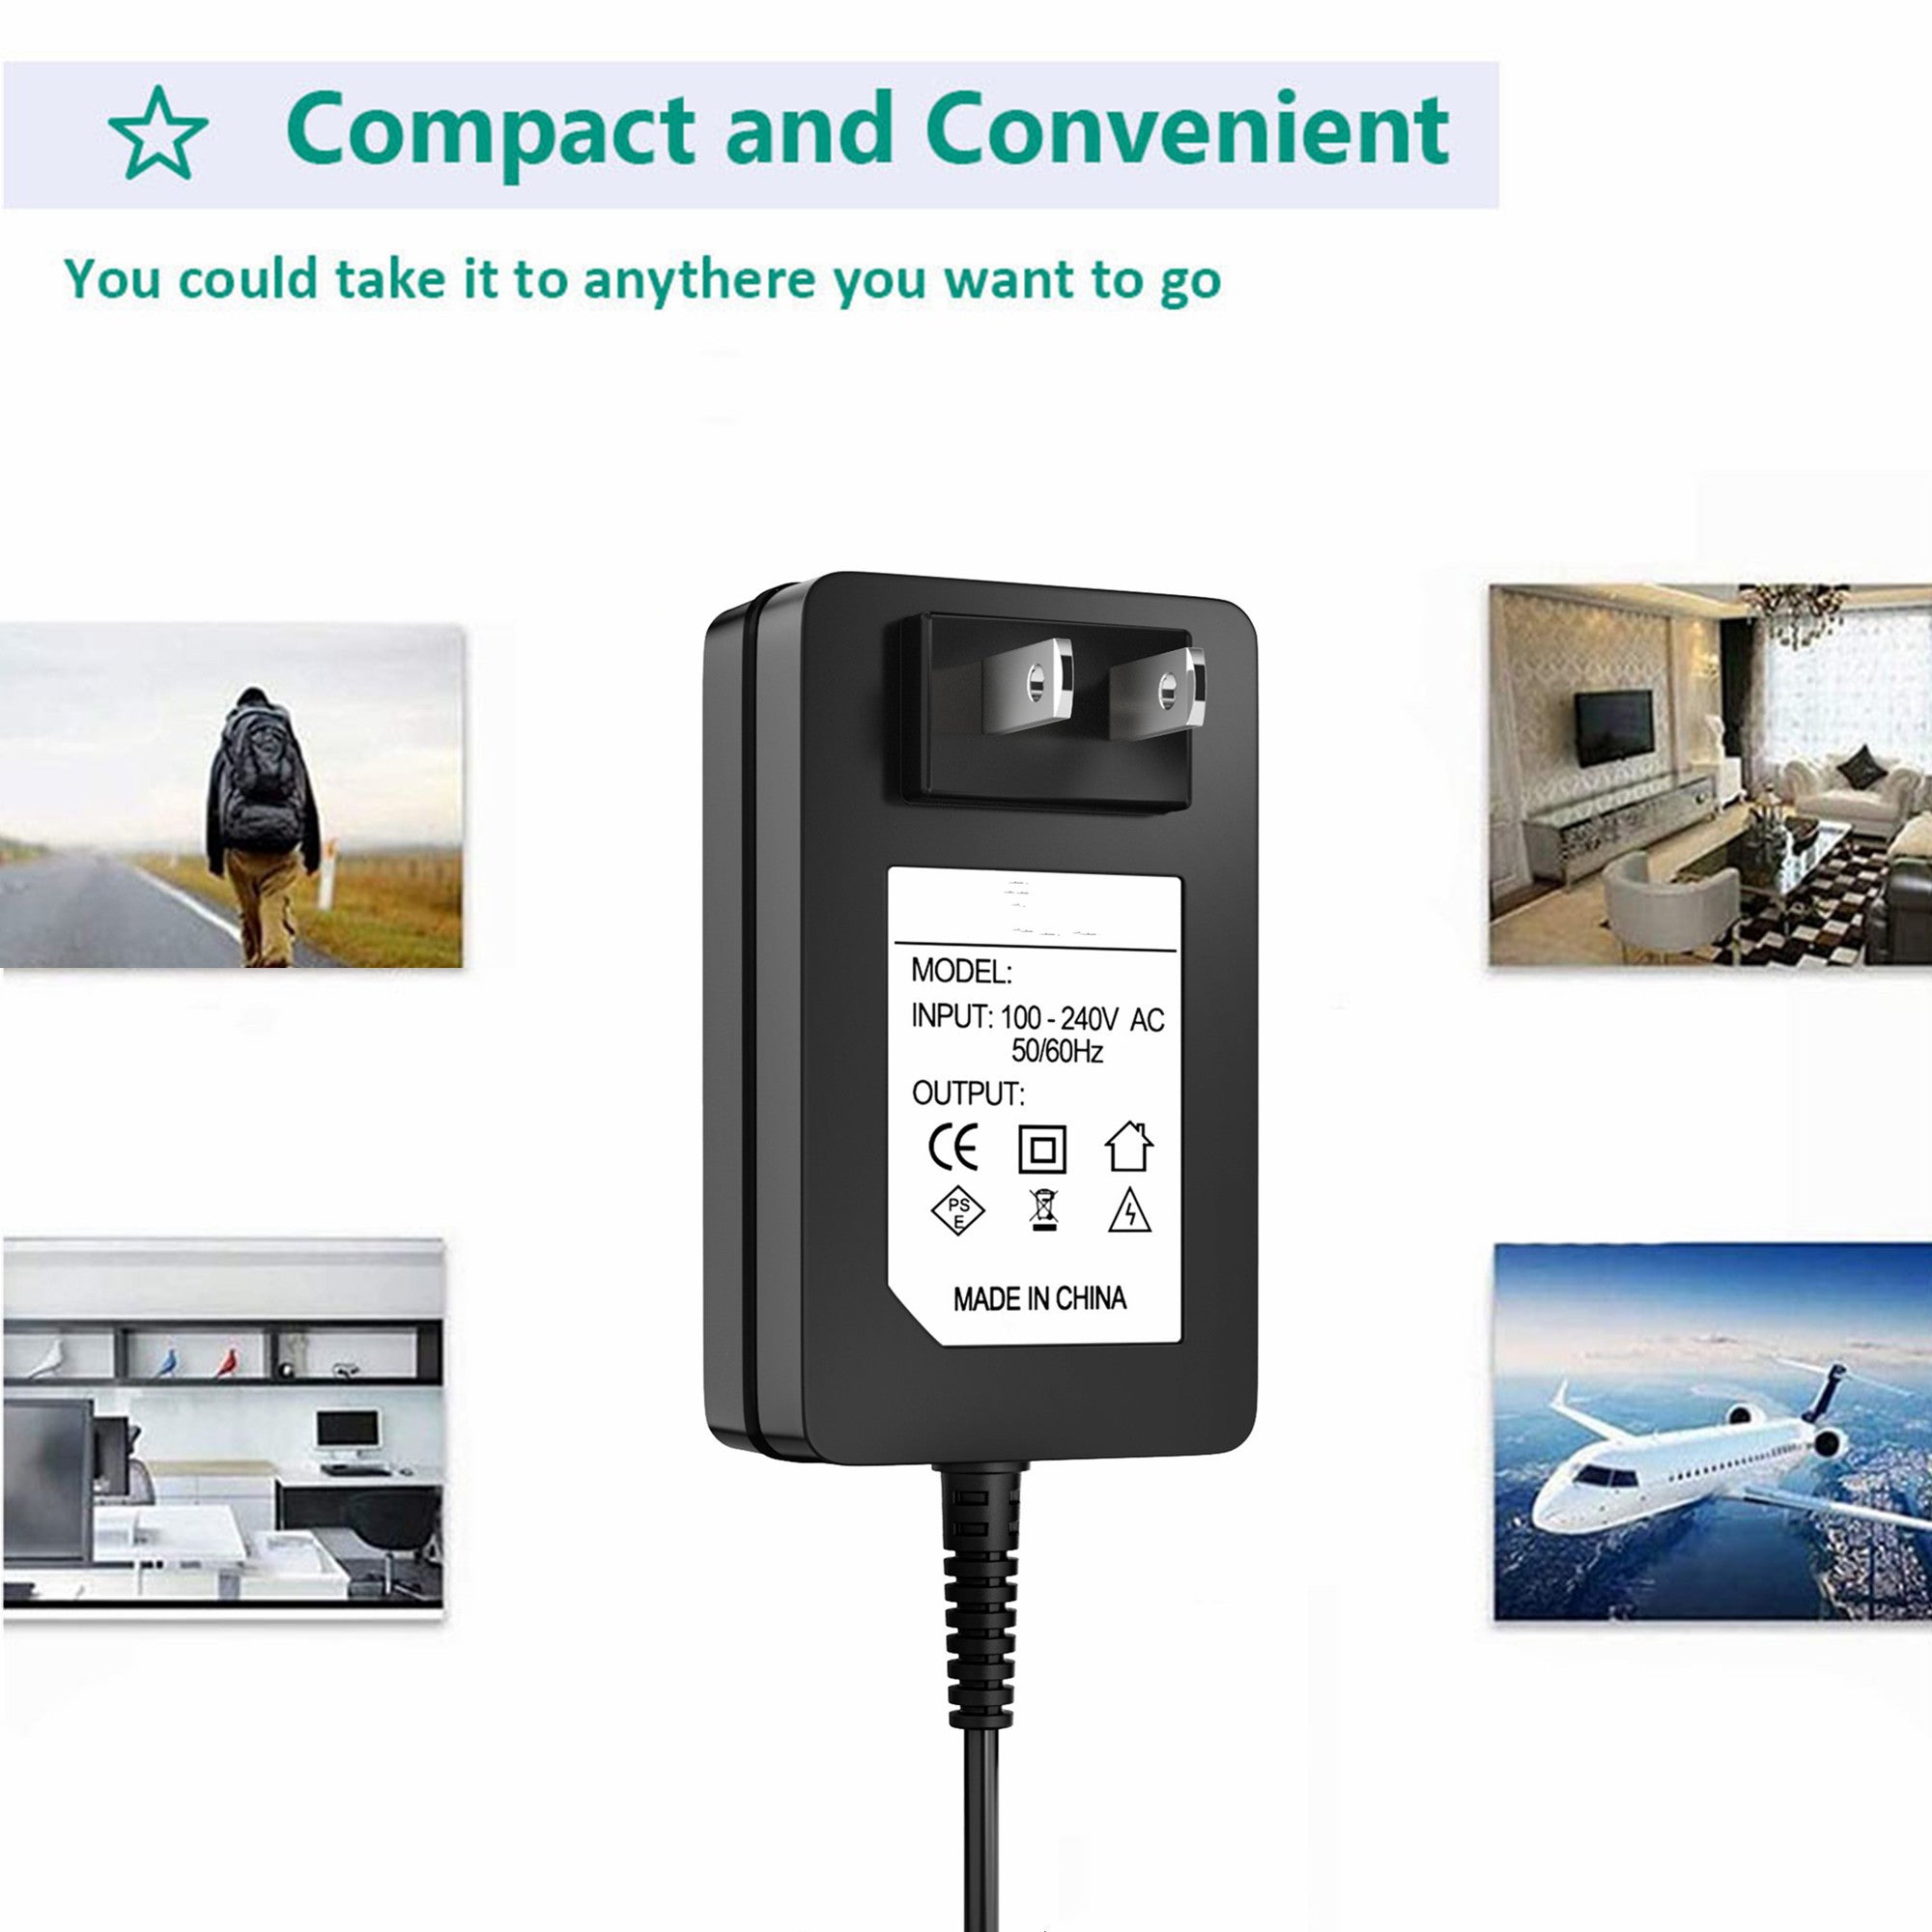 AbleGrid AC Adapter Compatible with Making Memories Slice Cordless Design Cutter Item# 30750 Power